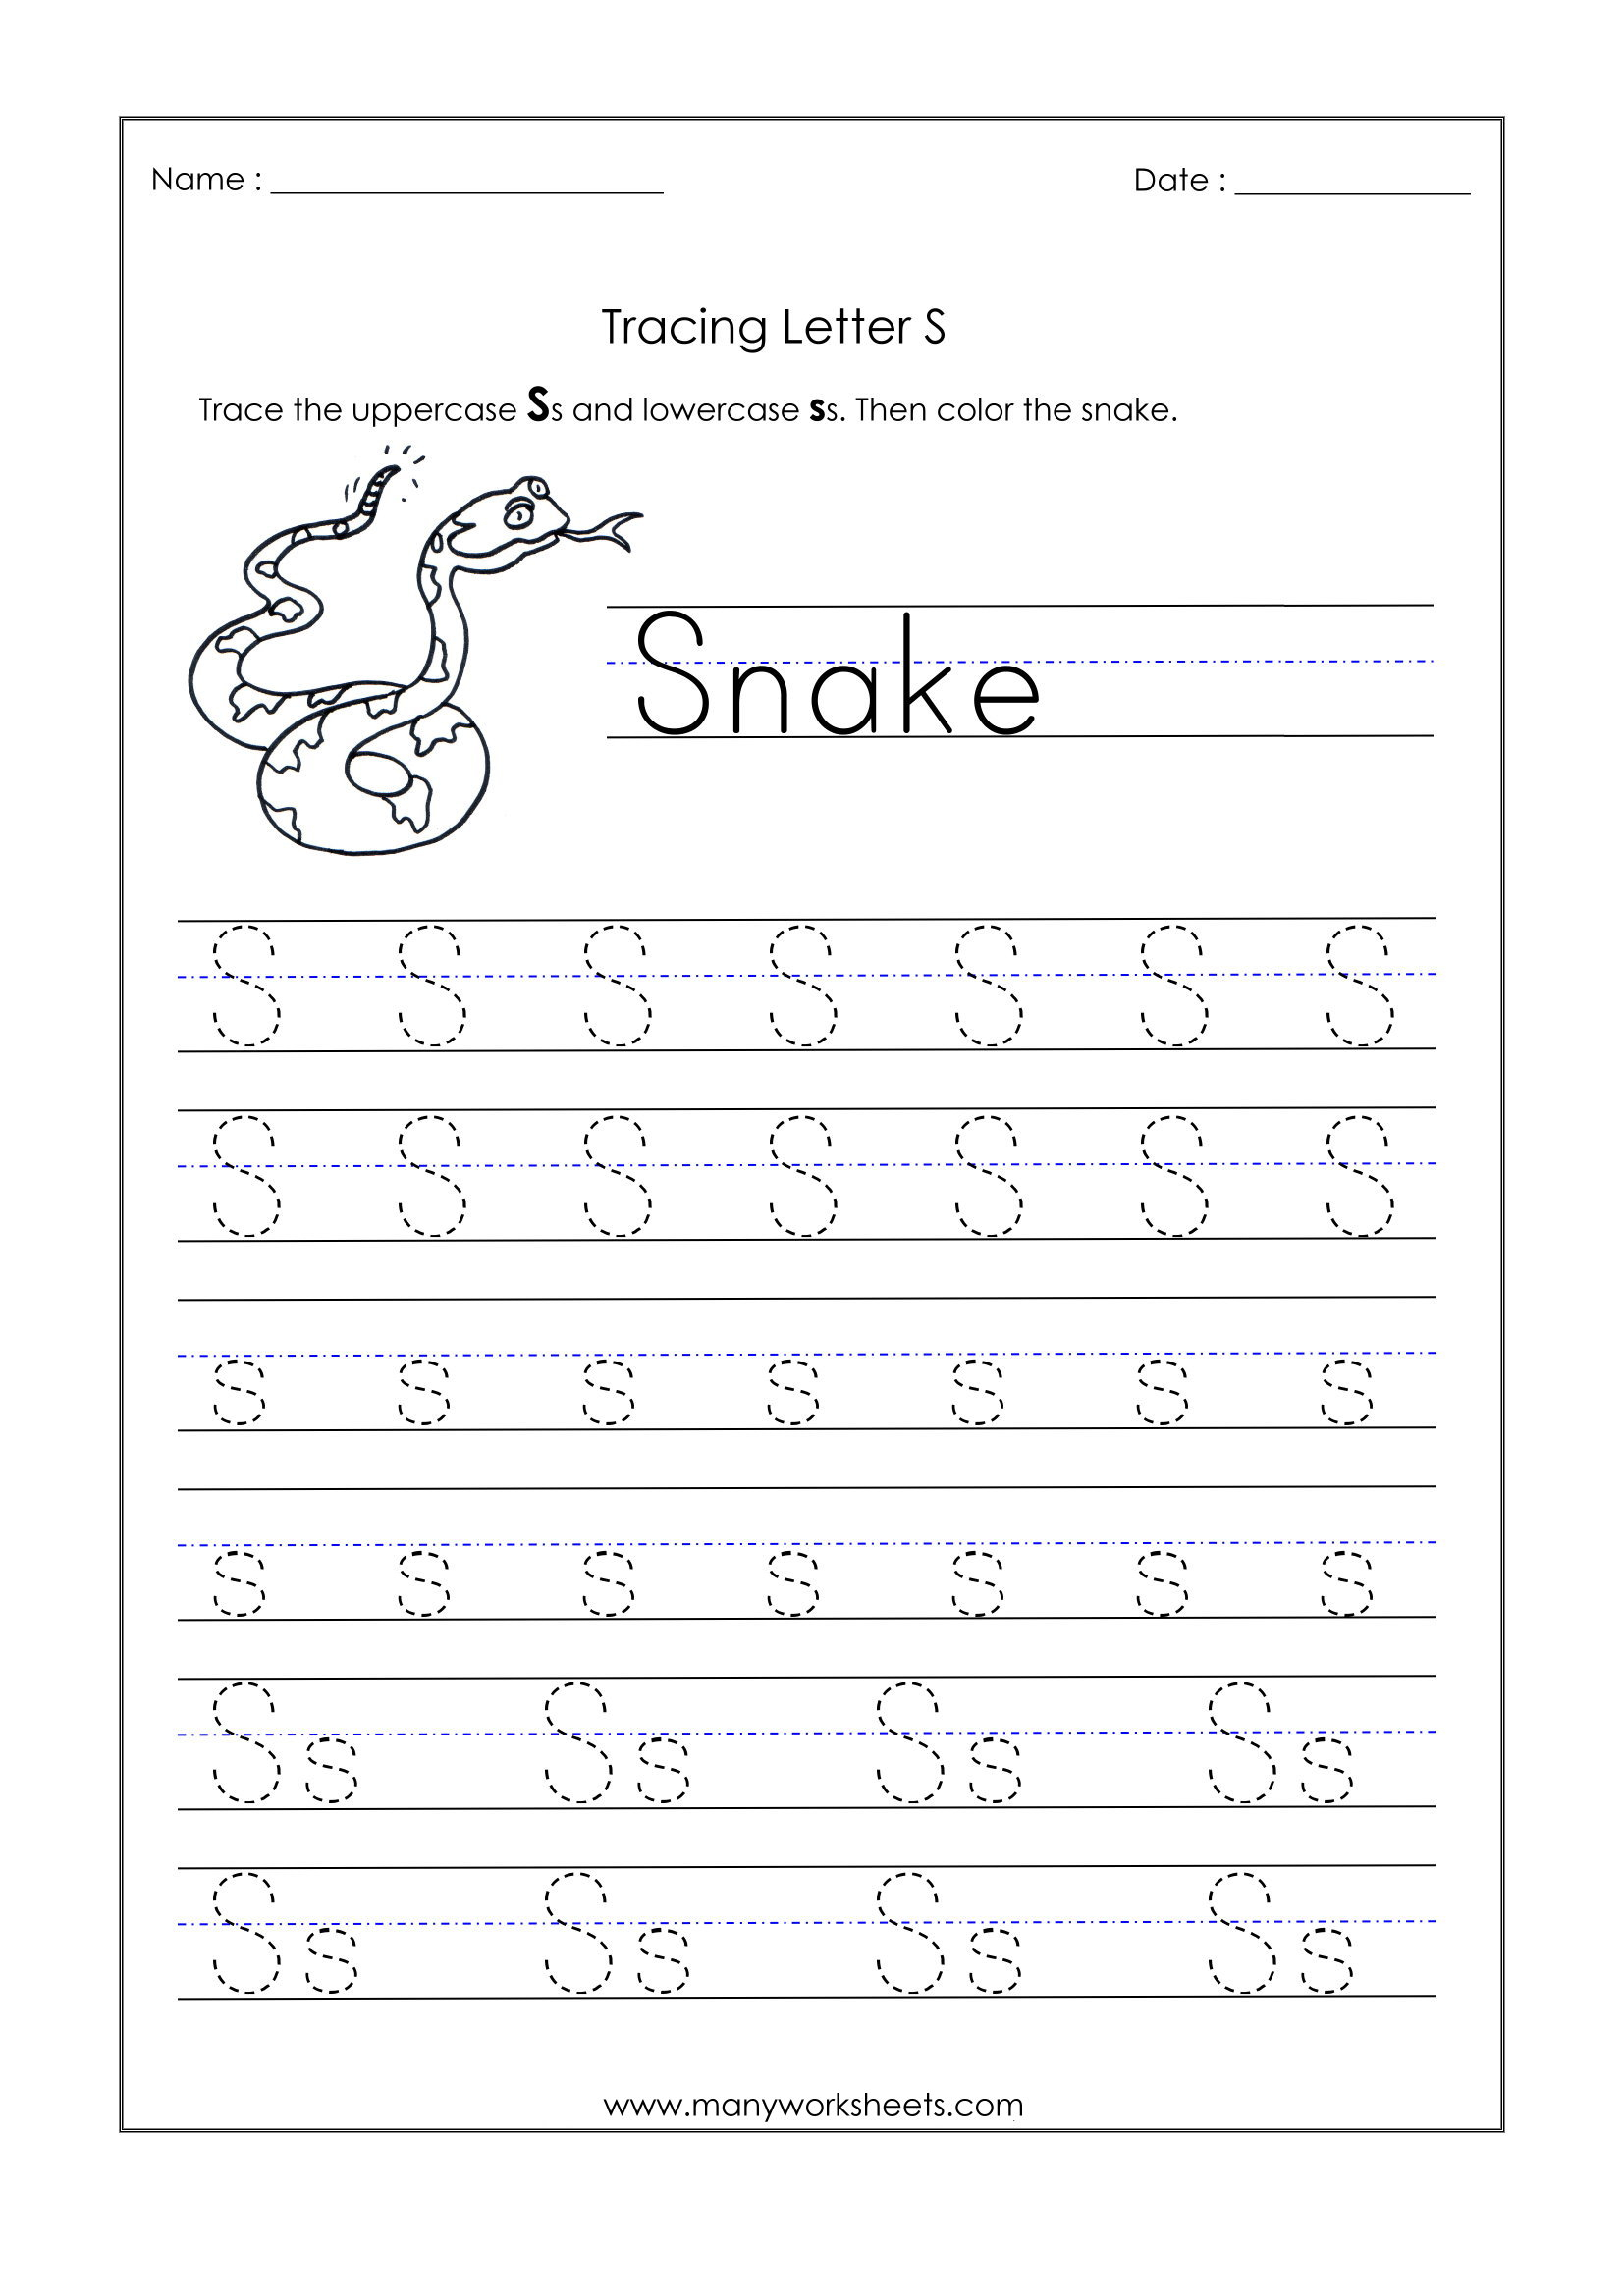 The Letter S Tracing Worksheet